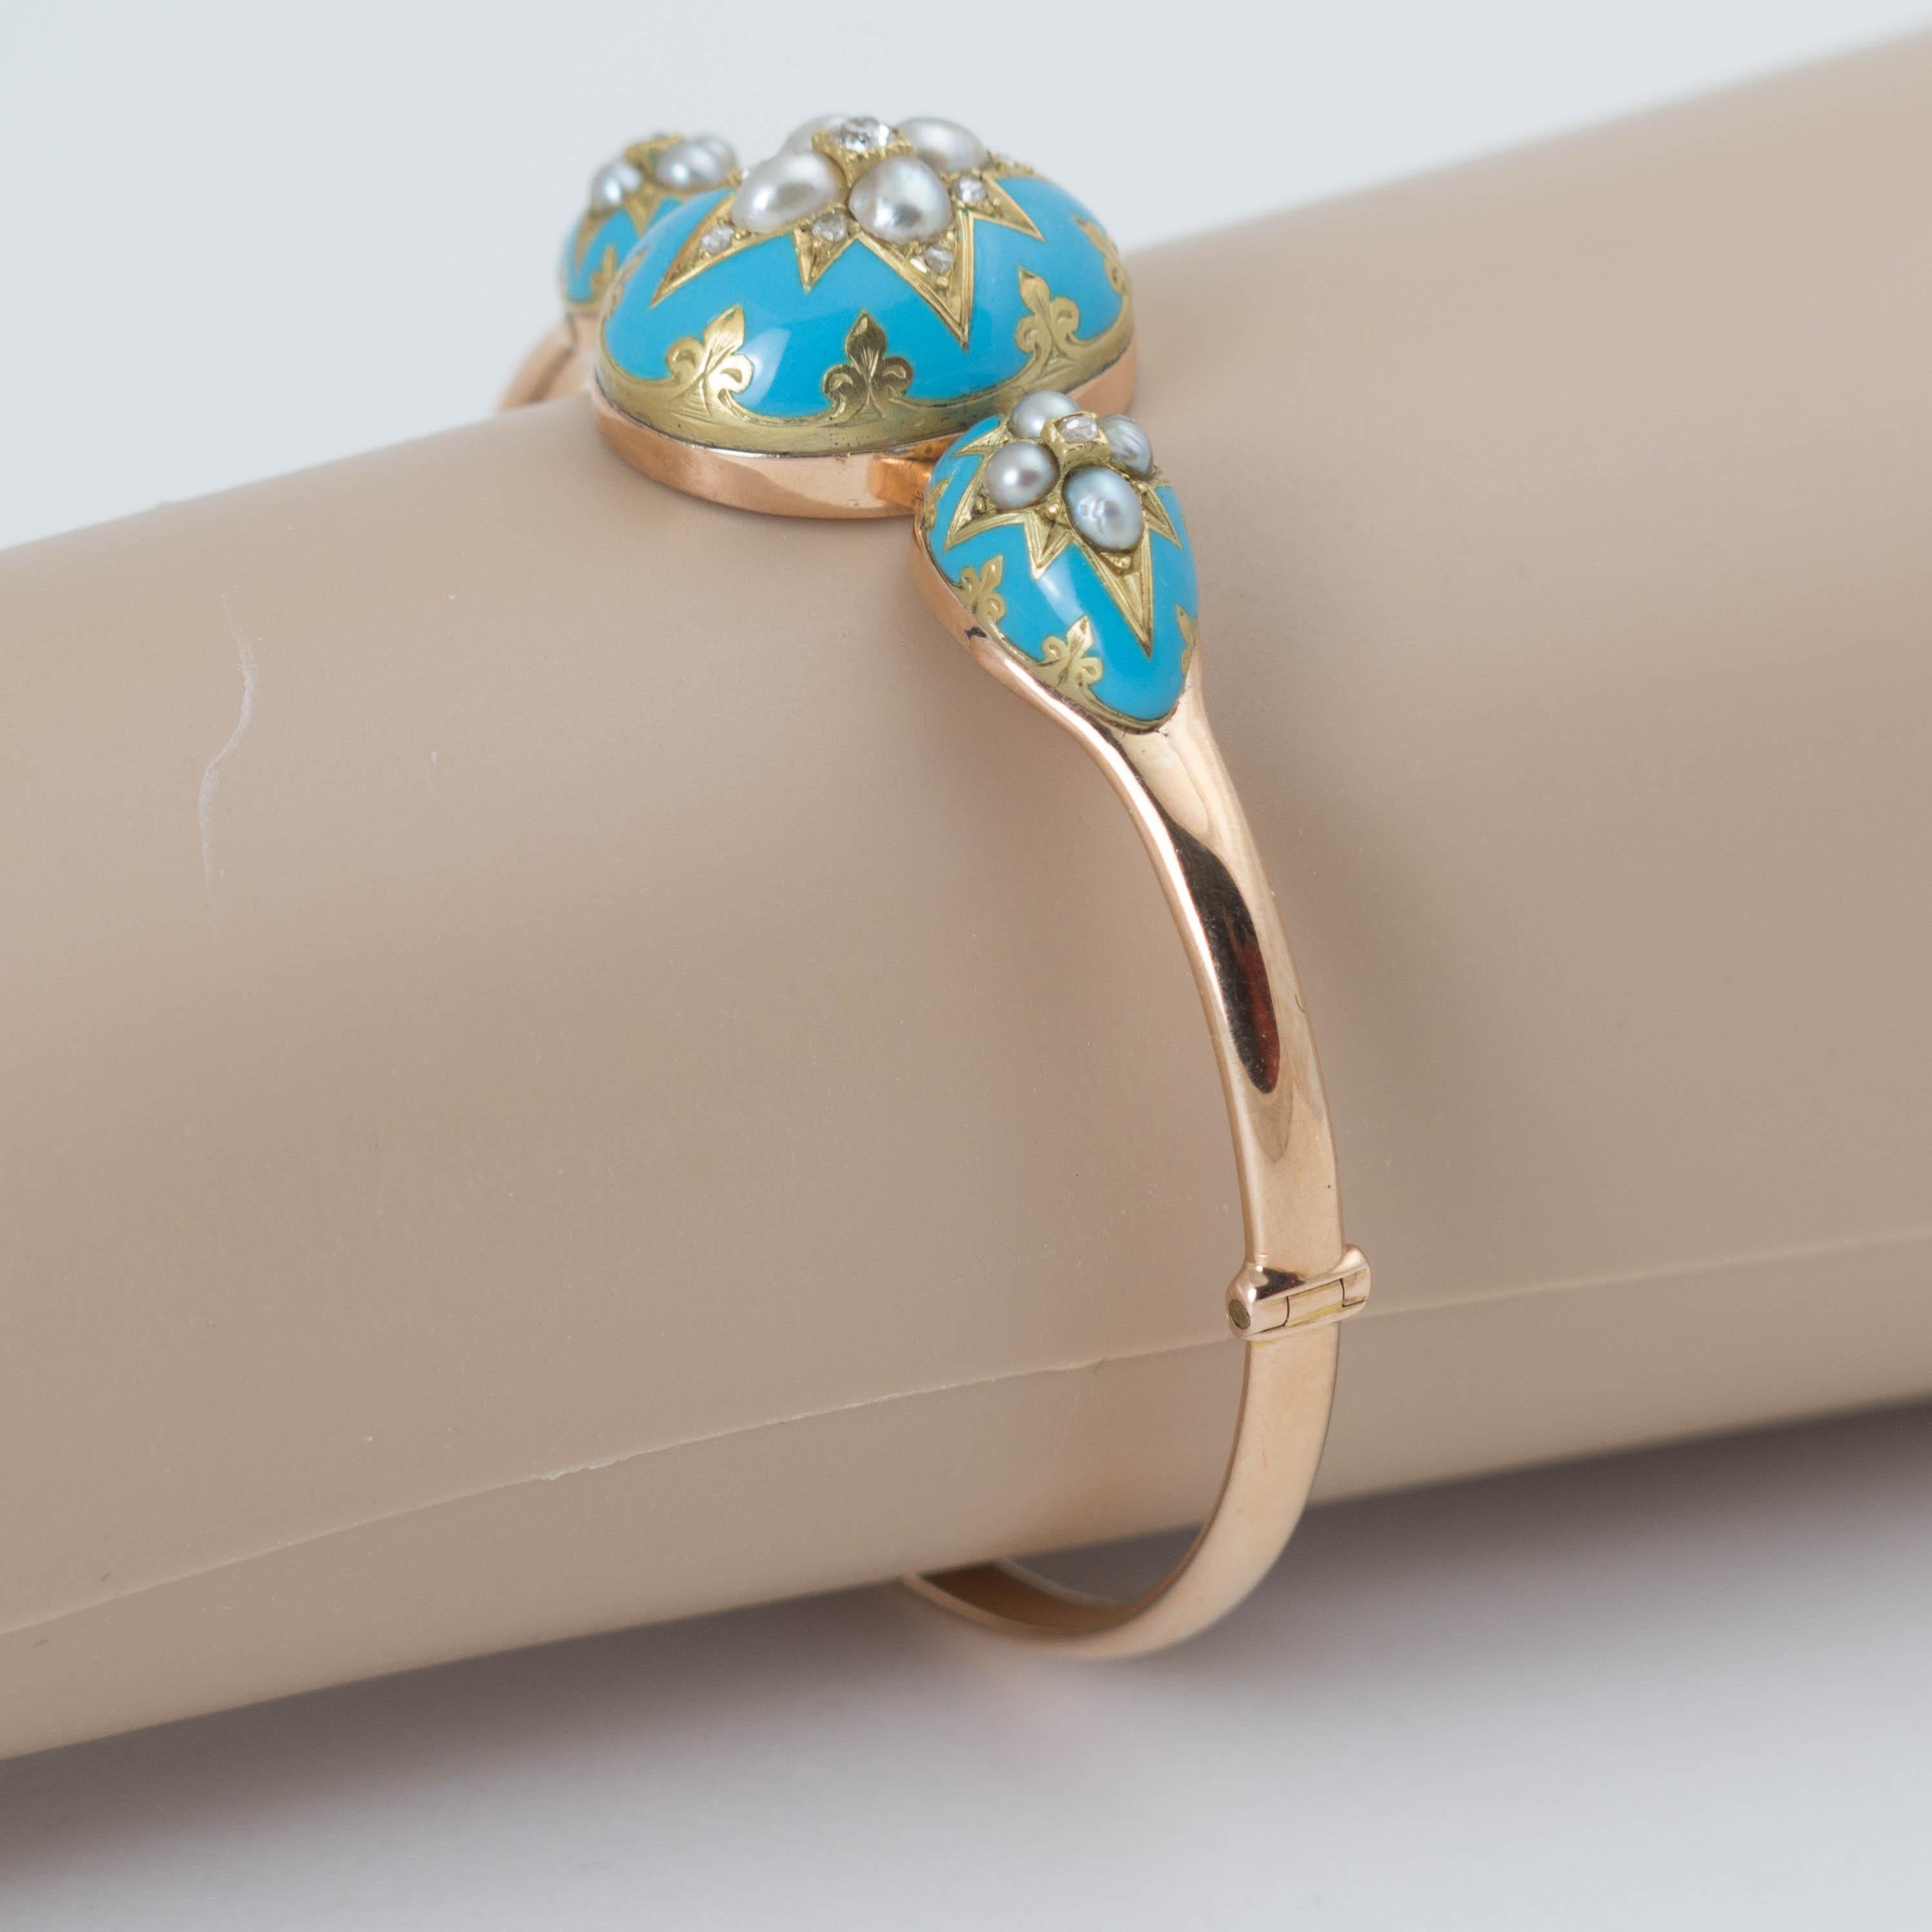 Antique Victorian Turquoise Blue Enamel Gold Bracelet with Diamonds and Pearls For Sale 2